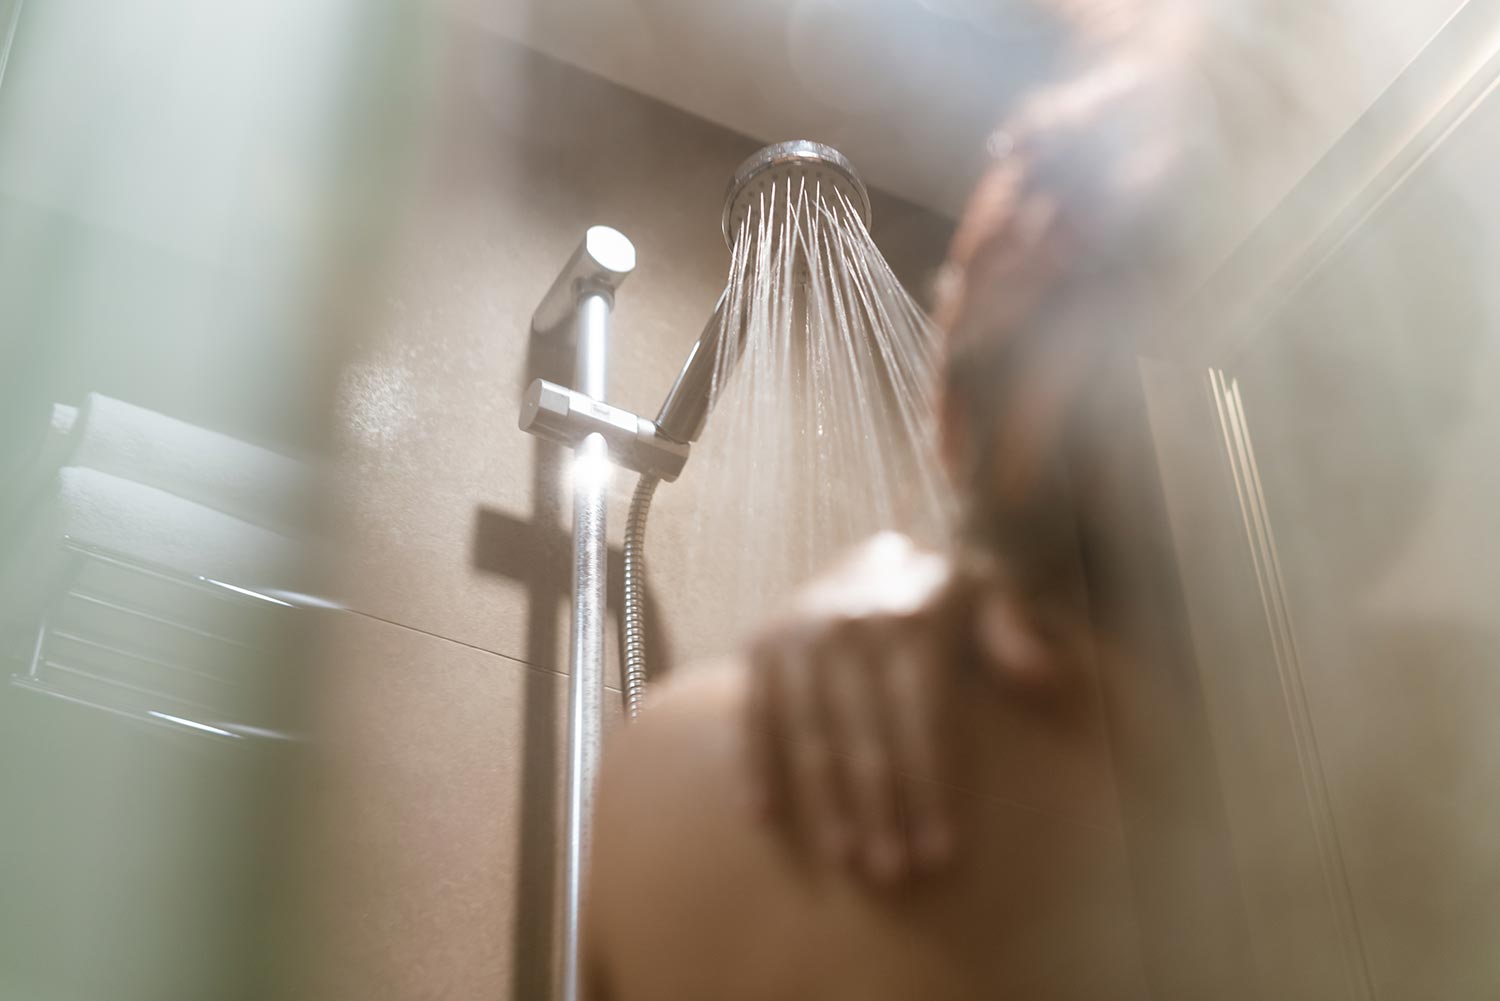 Woman taking a shower in the bathroom with hot steam filling the room